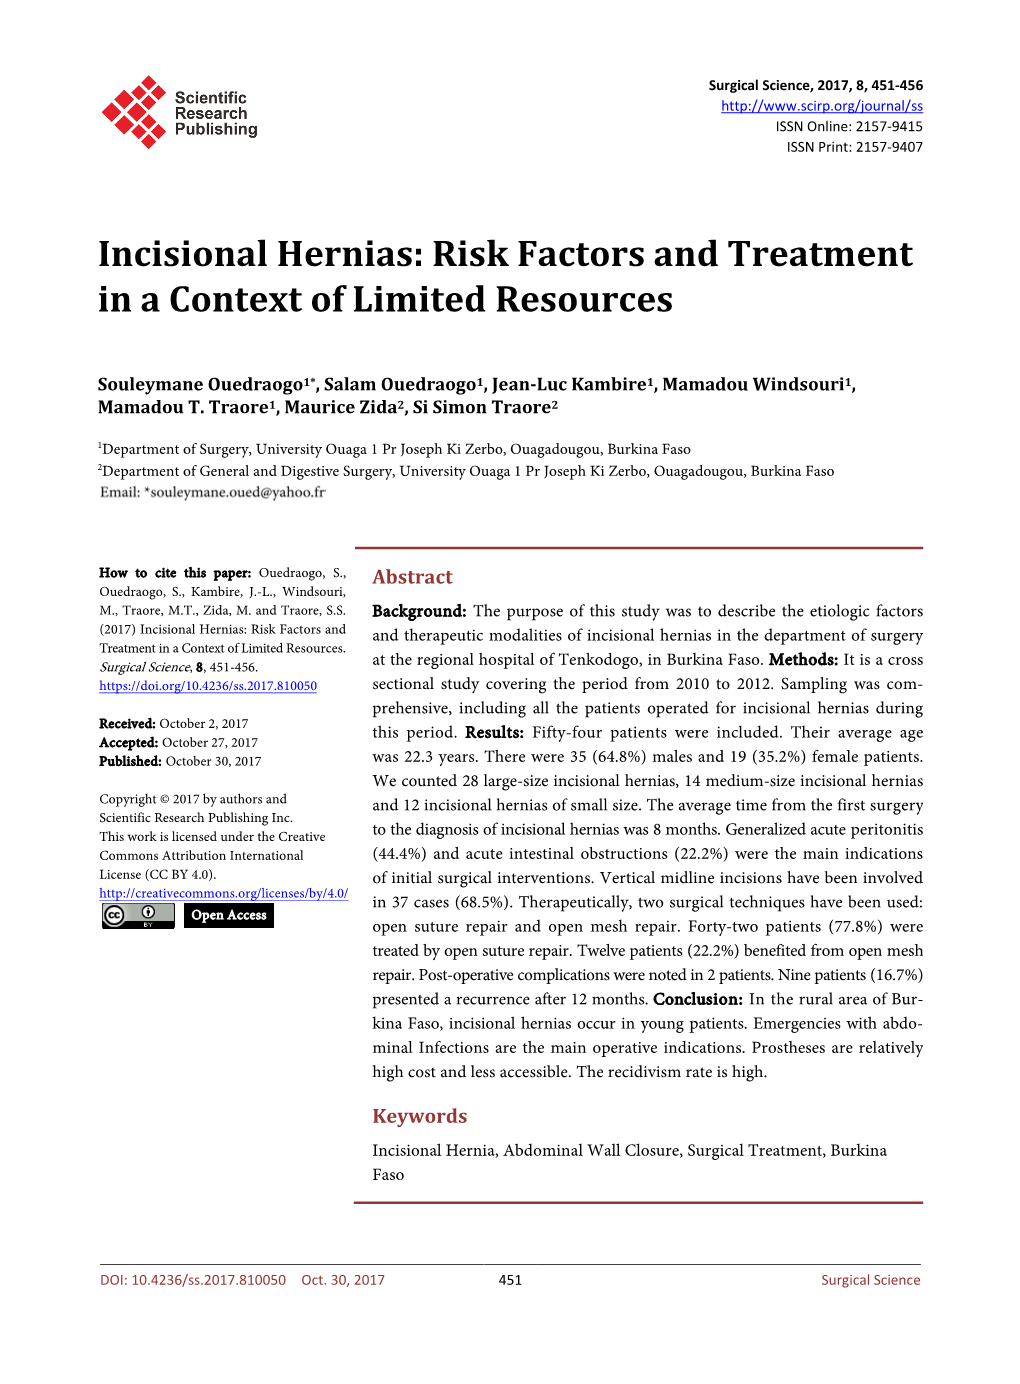 Incisional Hernias: Risk Factors and Treatment in a Context of Limited Resources